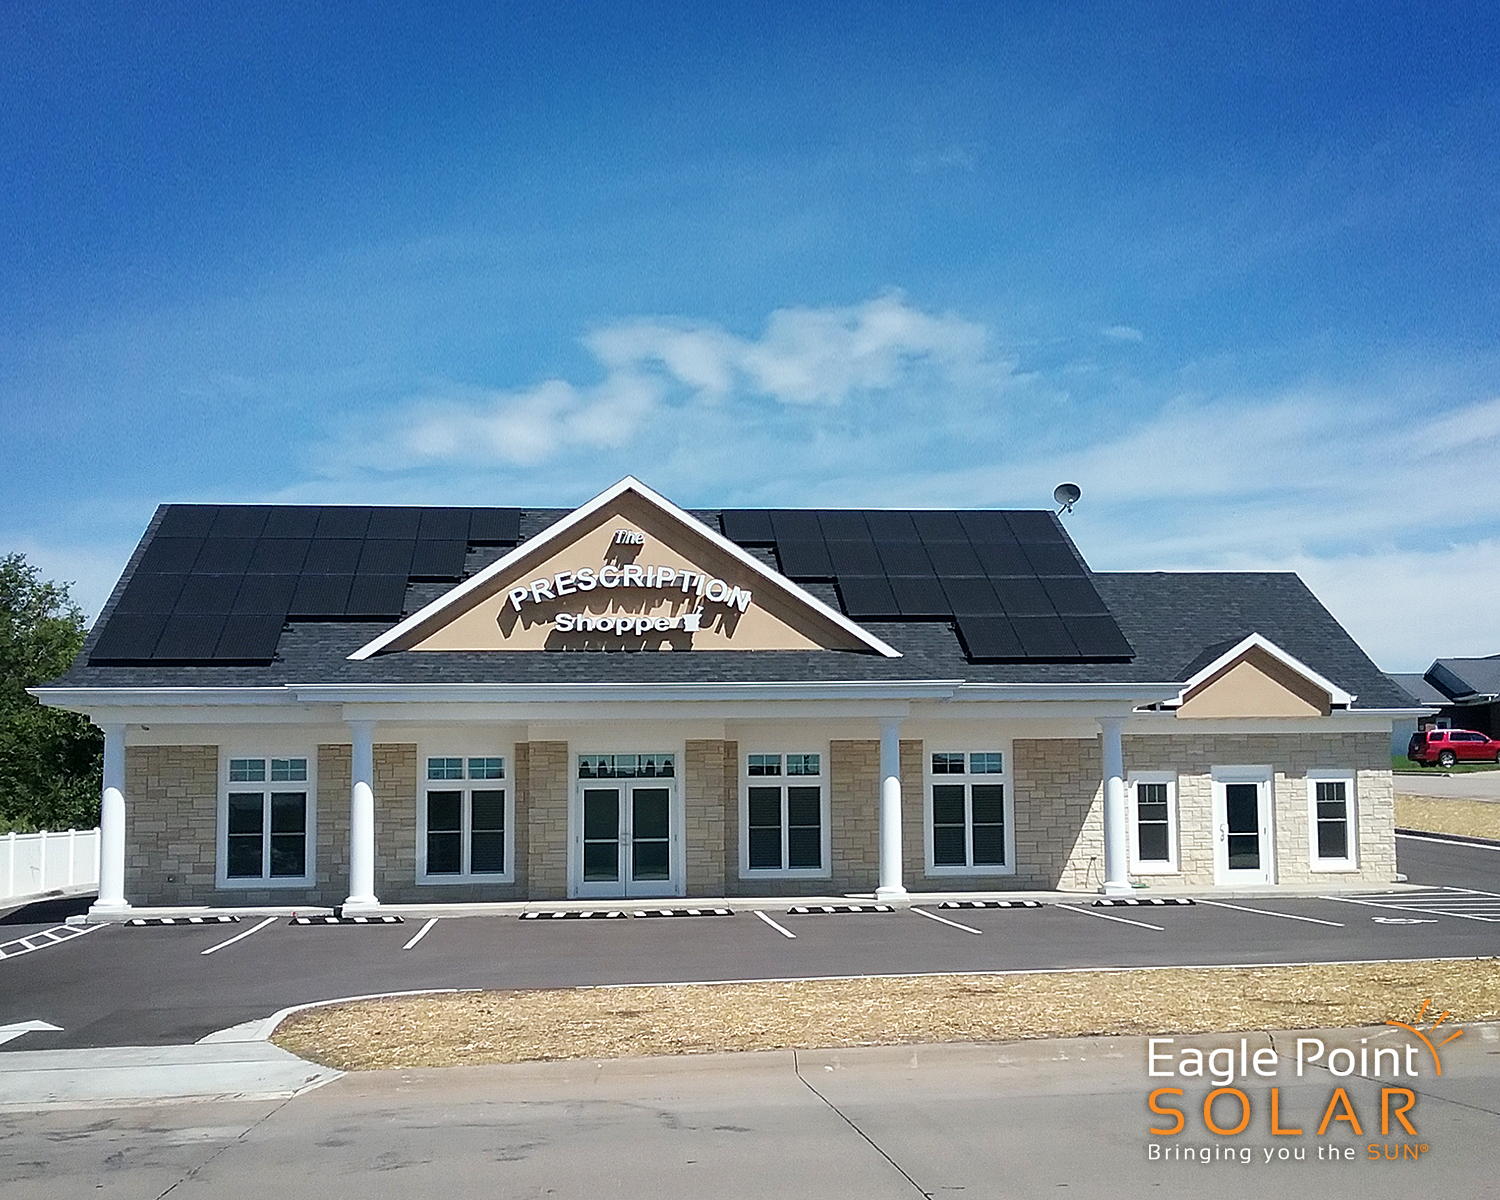 The Prescription Shoppe in Iowa, an example of commercial solar in action.